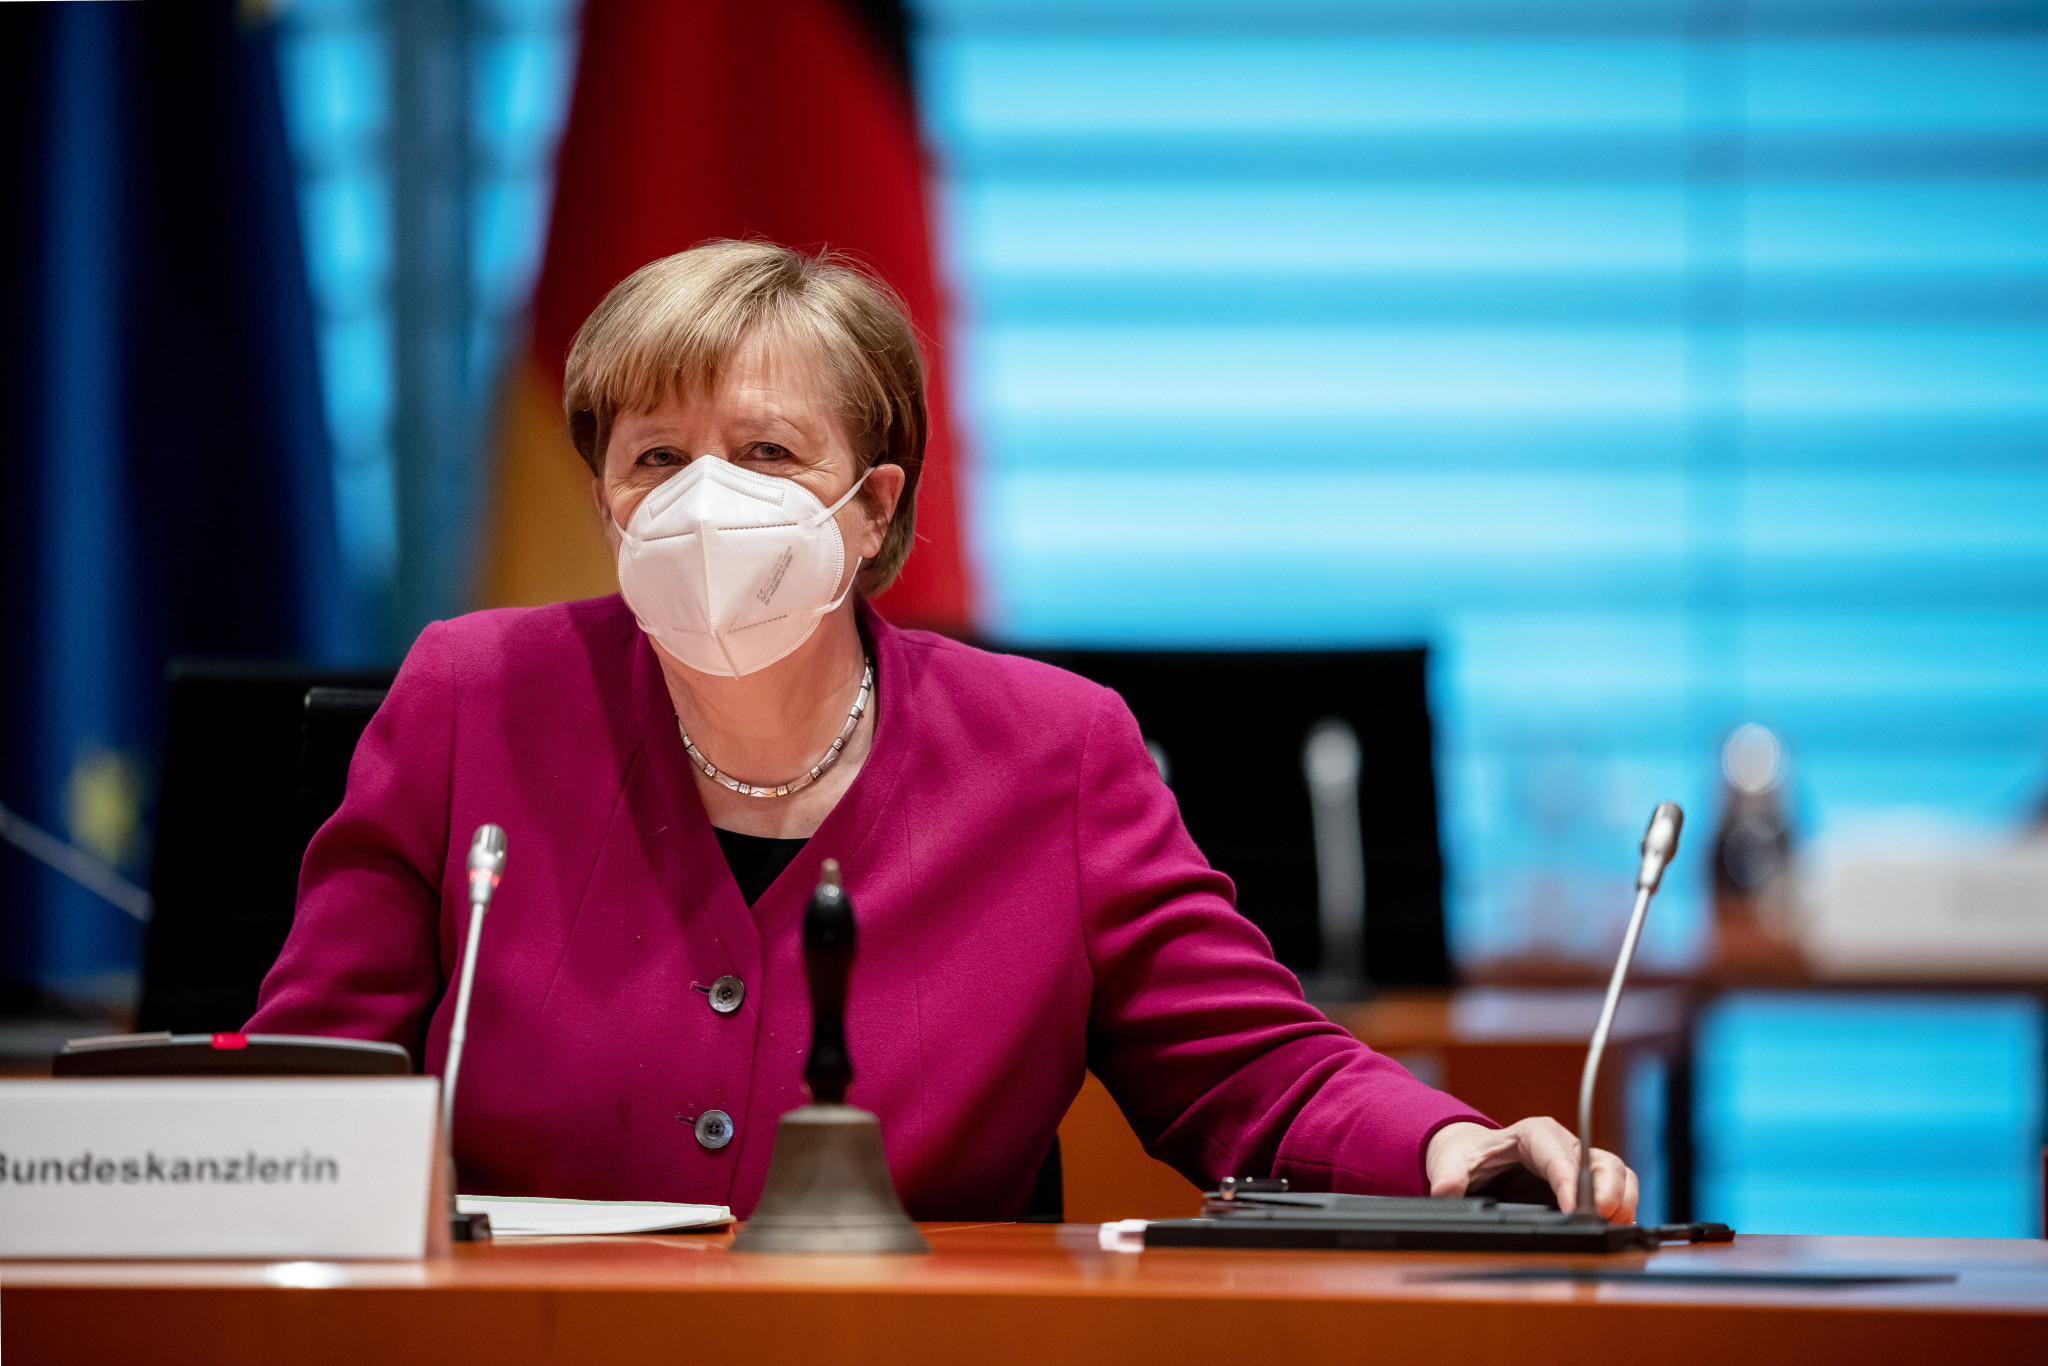 DOSB urges German Chancellor to support sports clubs during COVID-19 pandemic